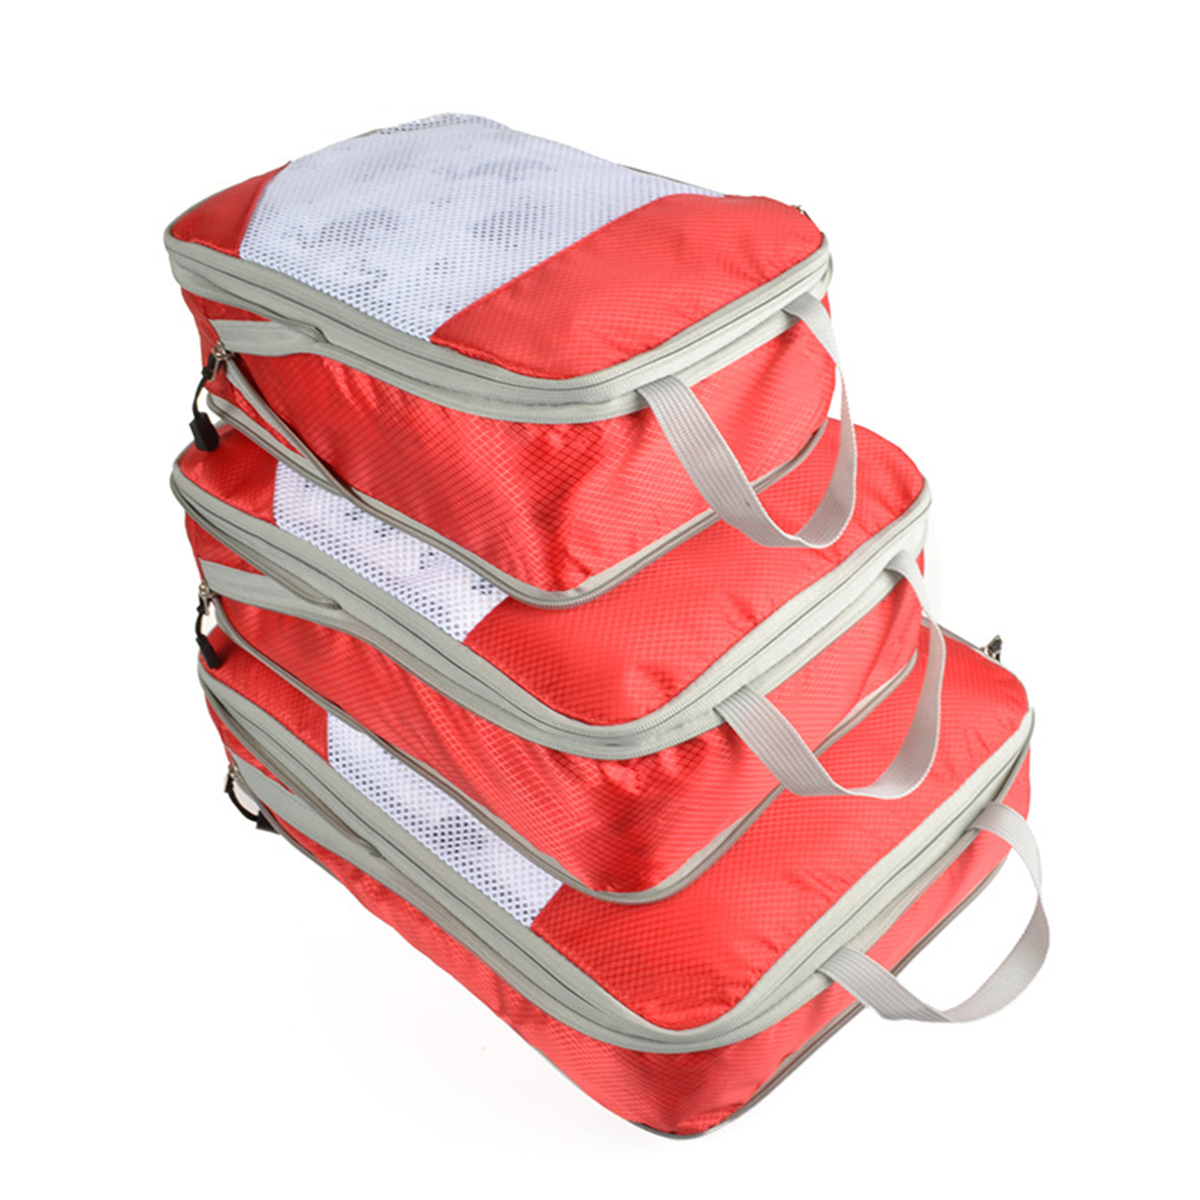 3PCS-Waterproof-Packing-Bags-Outdoor-Traveling-Luggage-Storage-Bag-Clothes-Bags-1603720-10